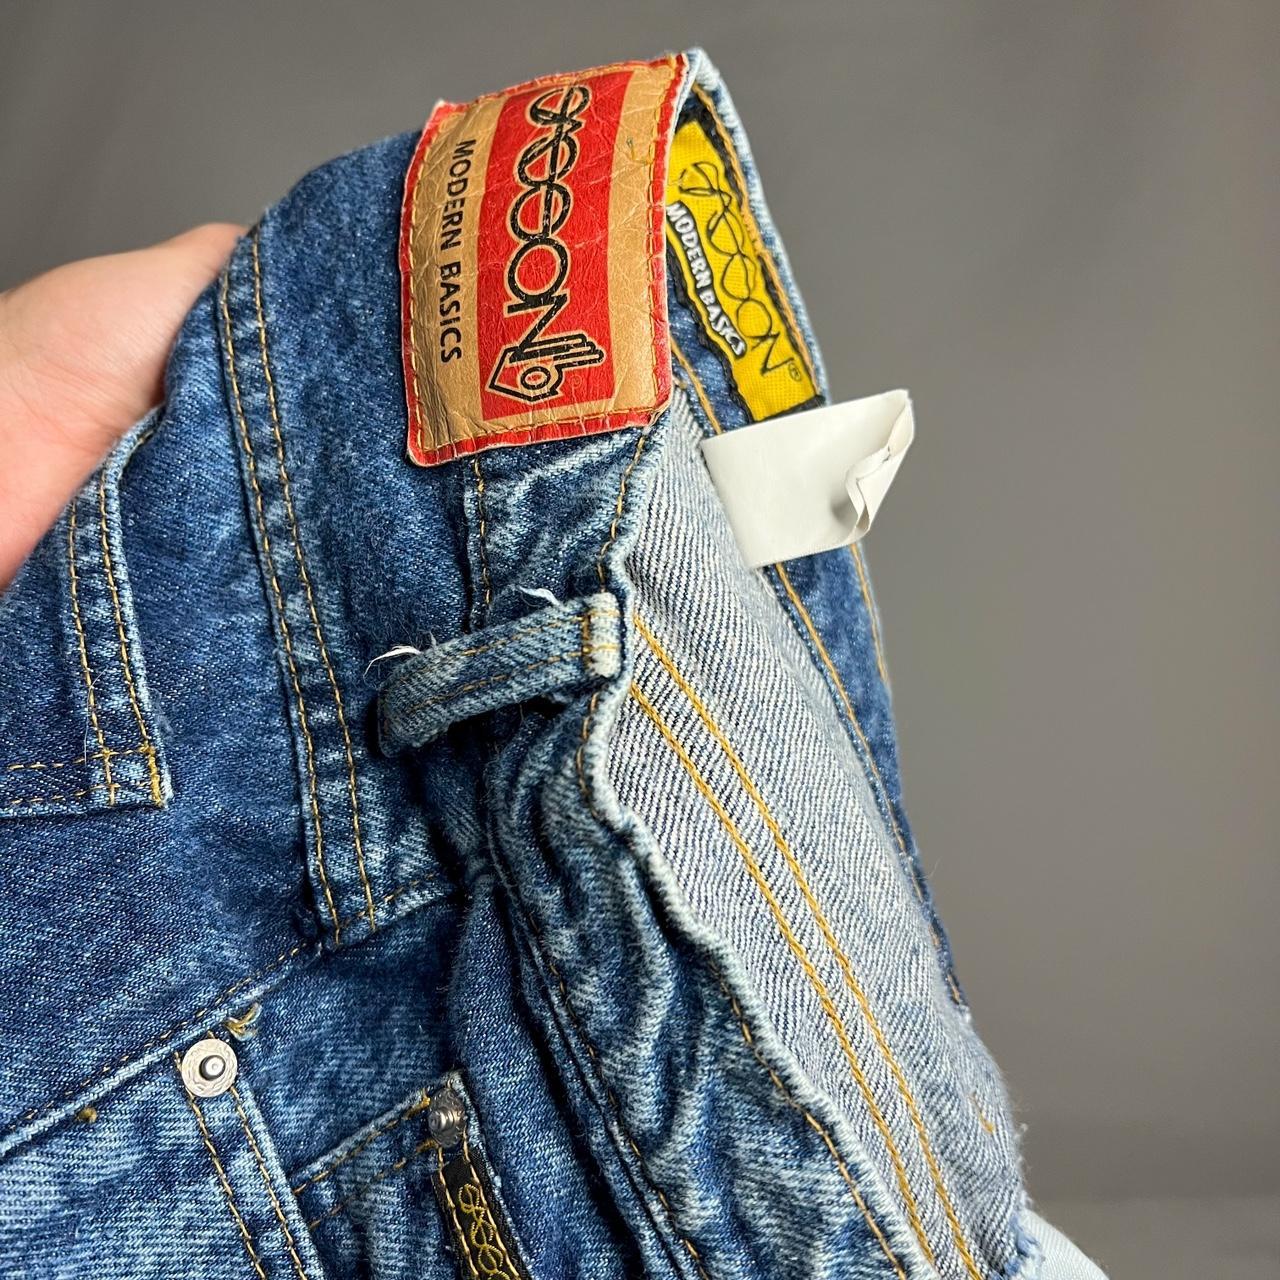 Product Image 4 - Vintage Sasson Jeans

- Great Condition!
-